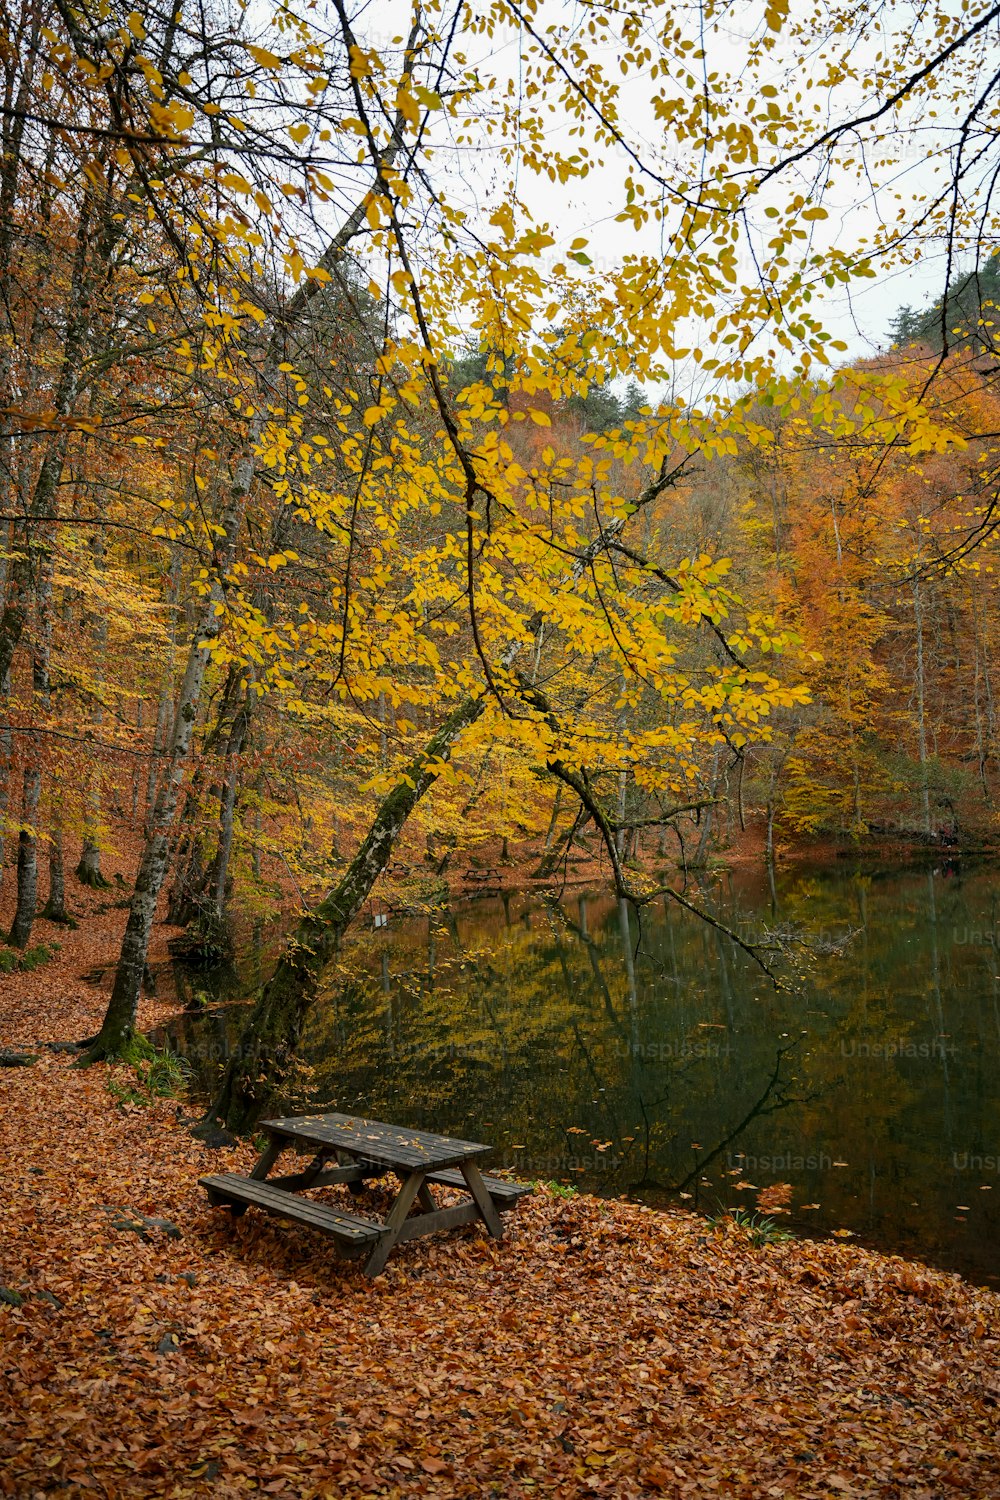 a picnic table sitting next to a lake surrounded by trees